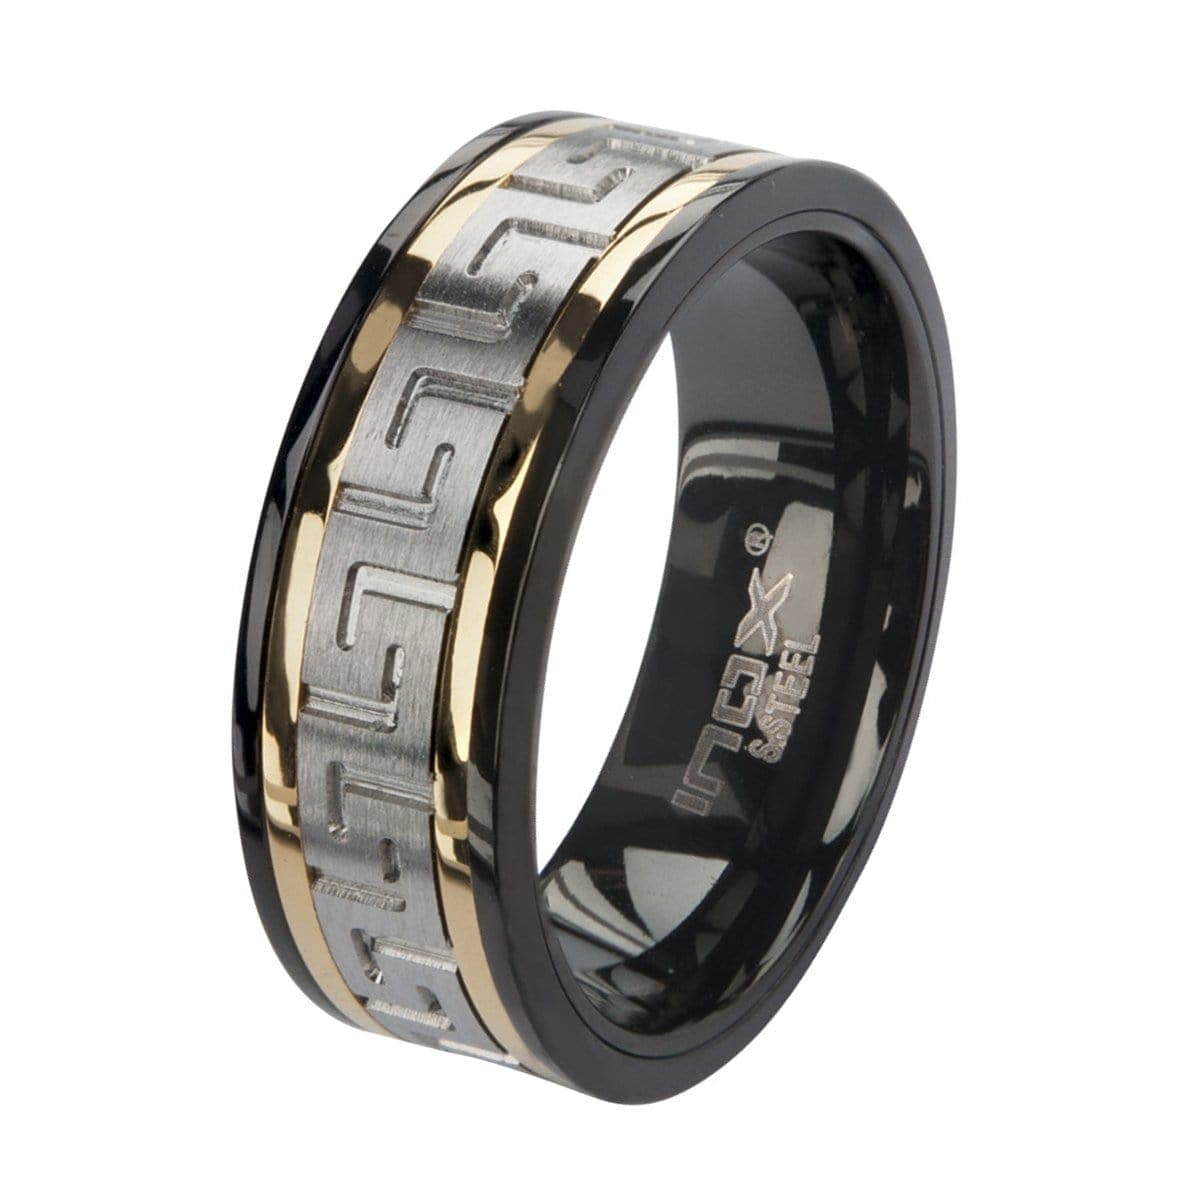 INOX JEWELRY Rings Golden Tone, Black and Silver Tone Stainless Steel Banded Greek Key Ring